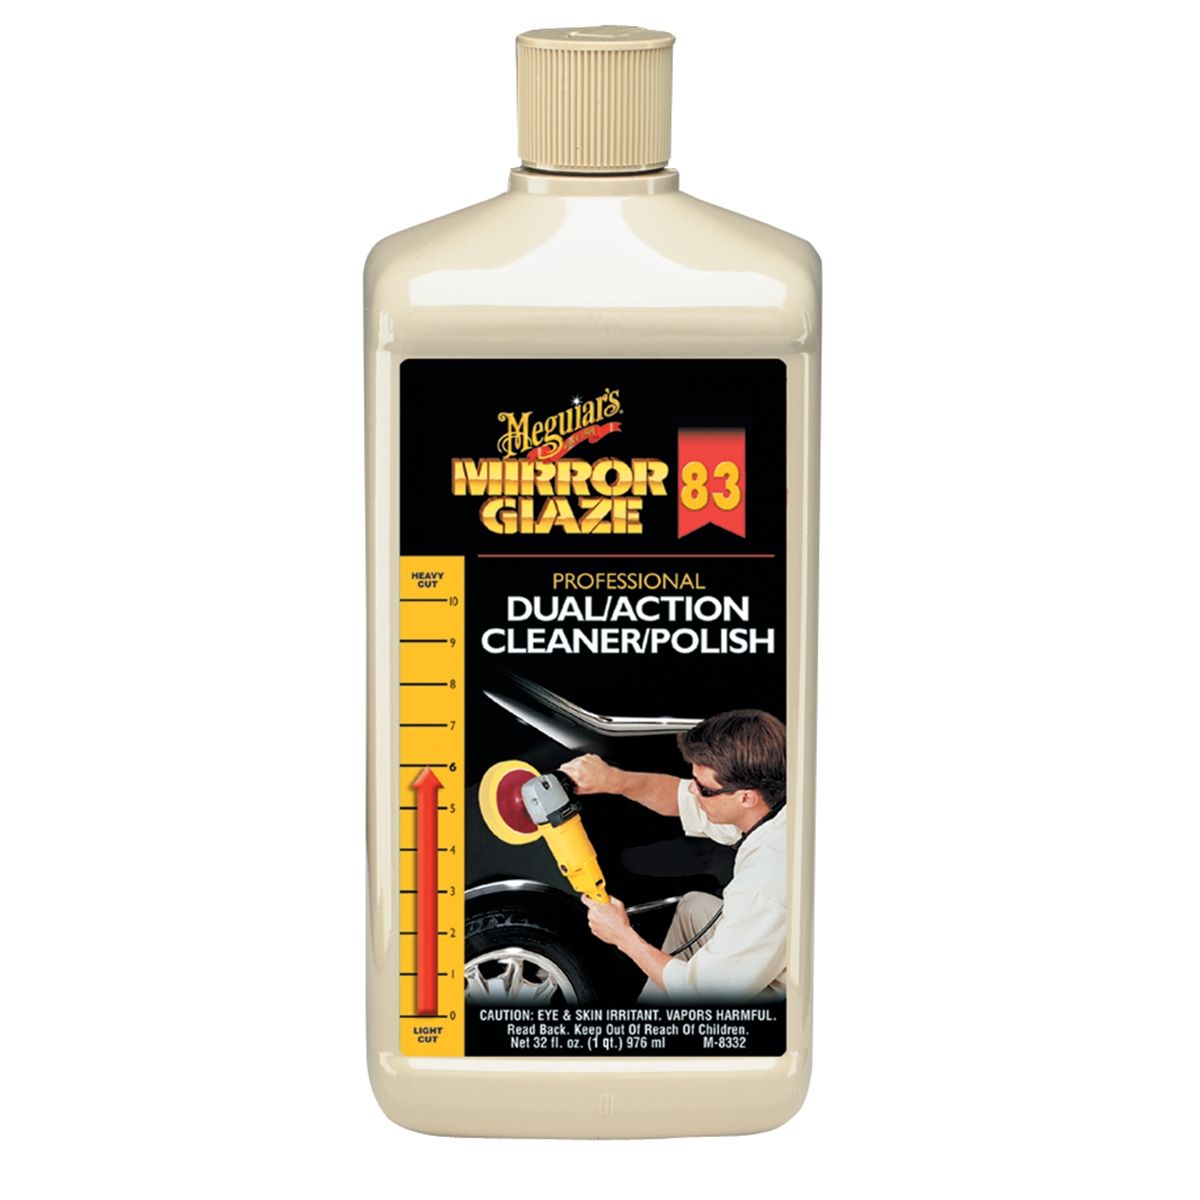 Body Shop Professional Dual Action Cleaner / Polish - 32 Oz